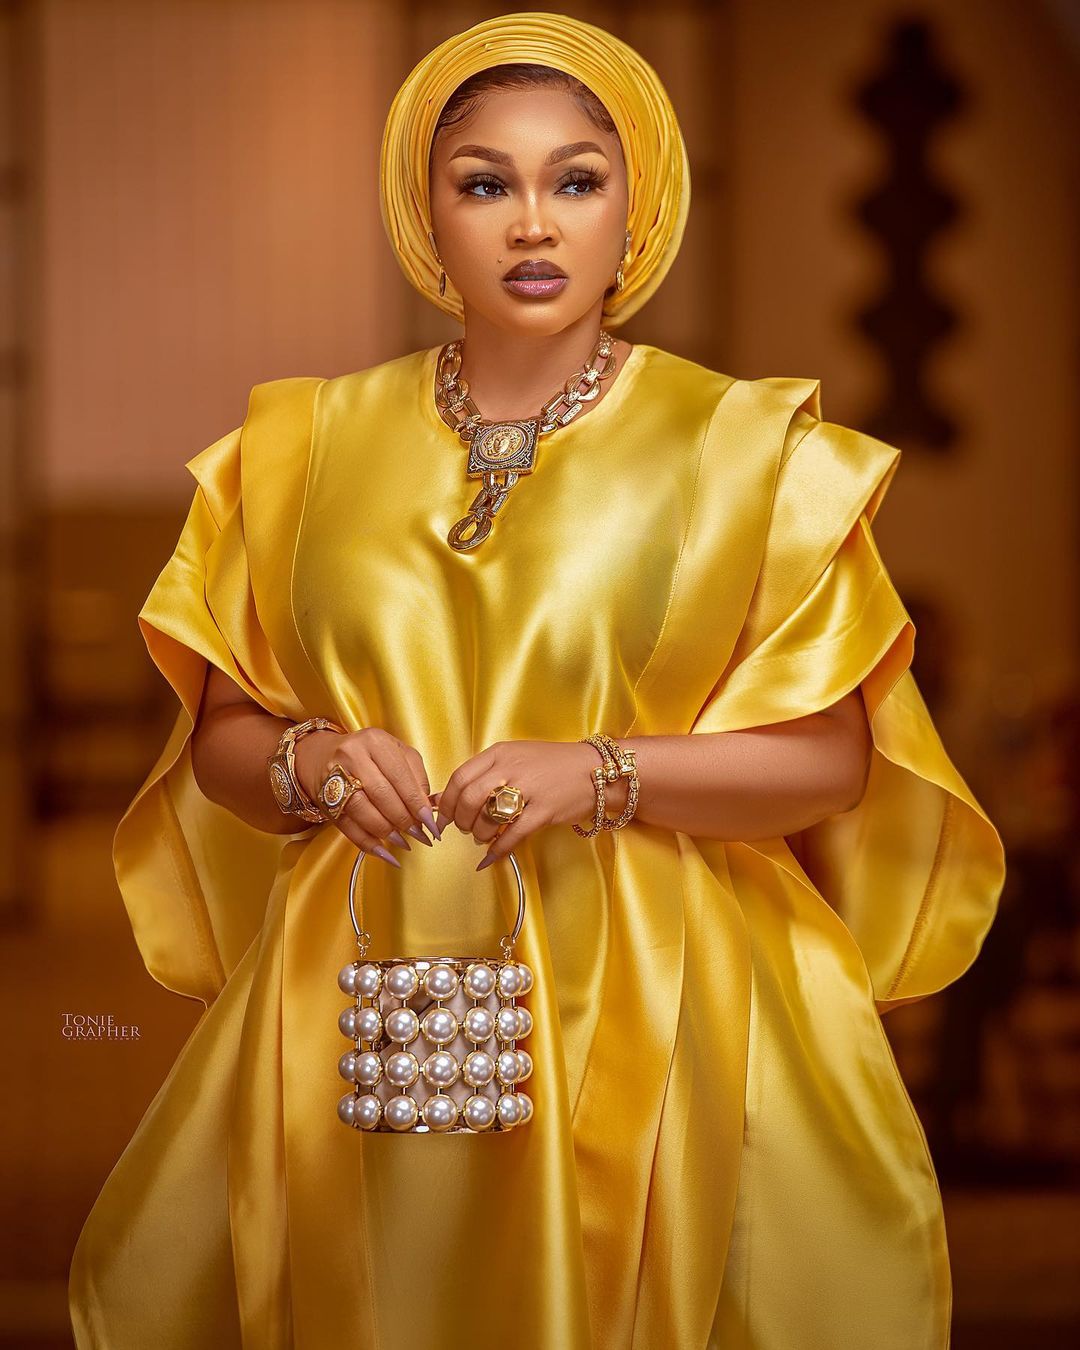 Mercy Aigbe's outfit